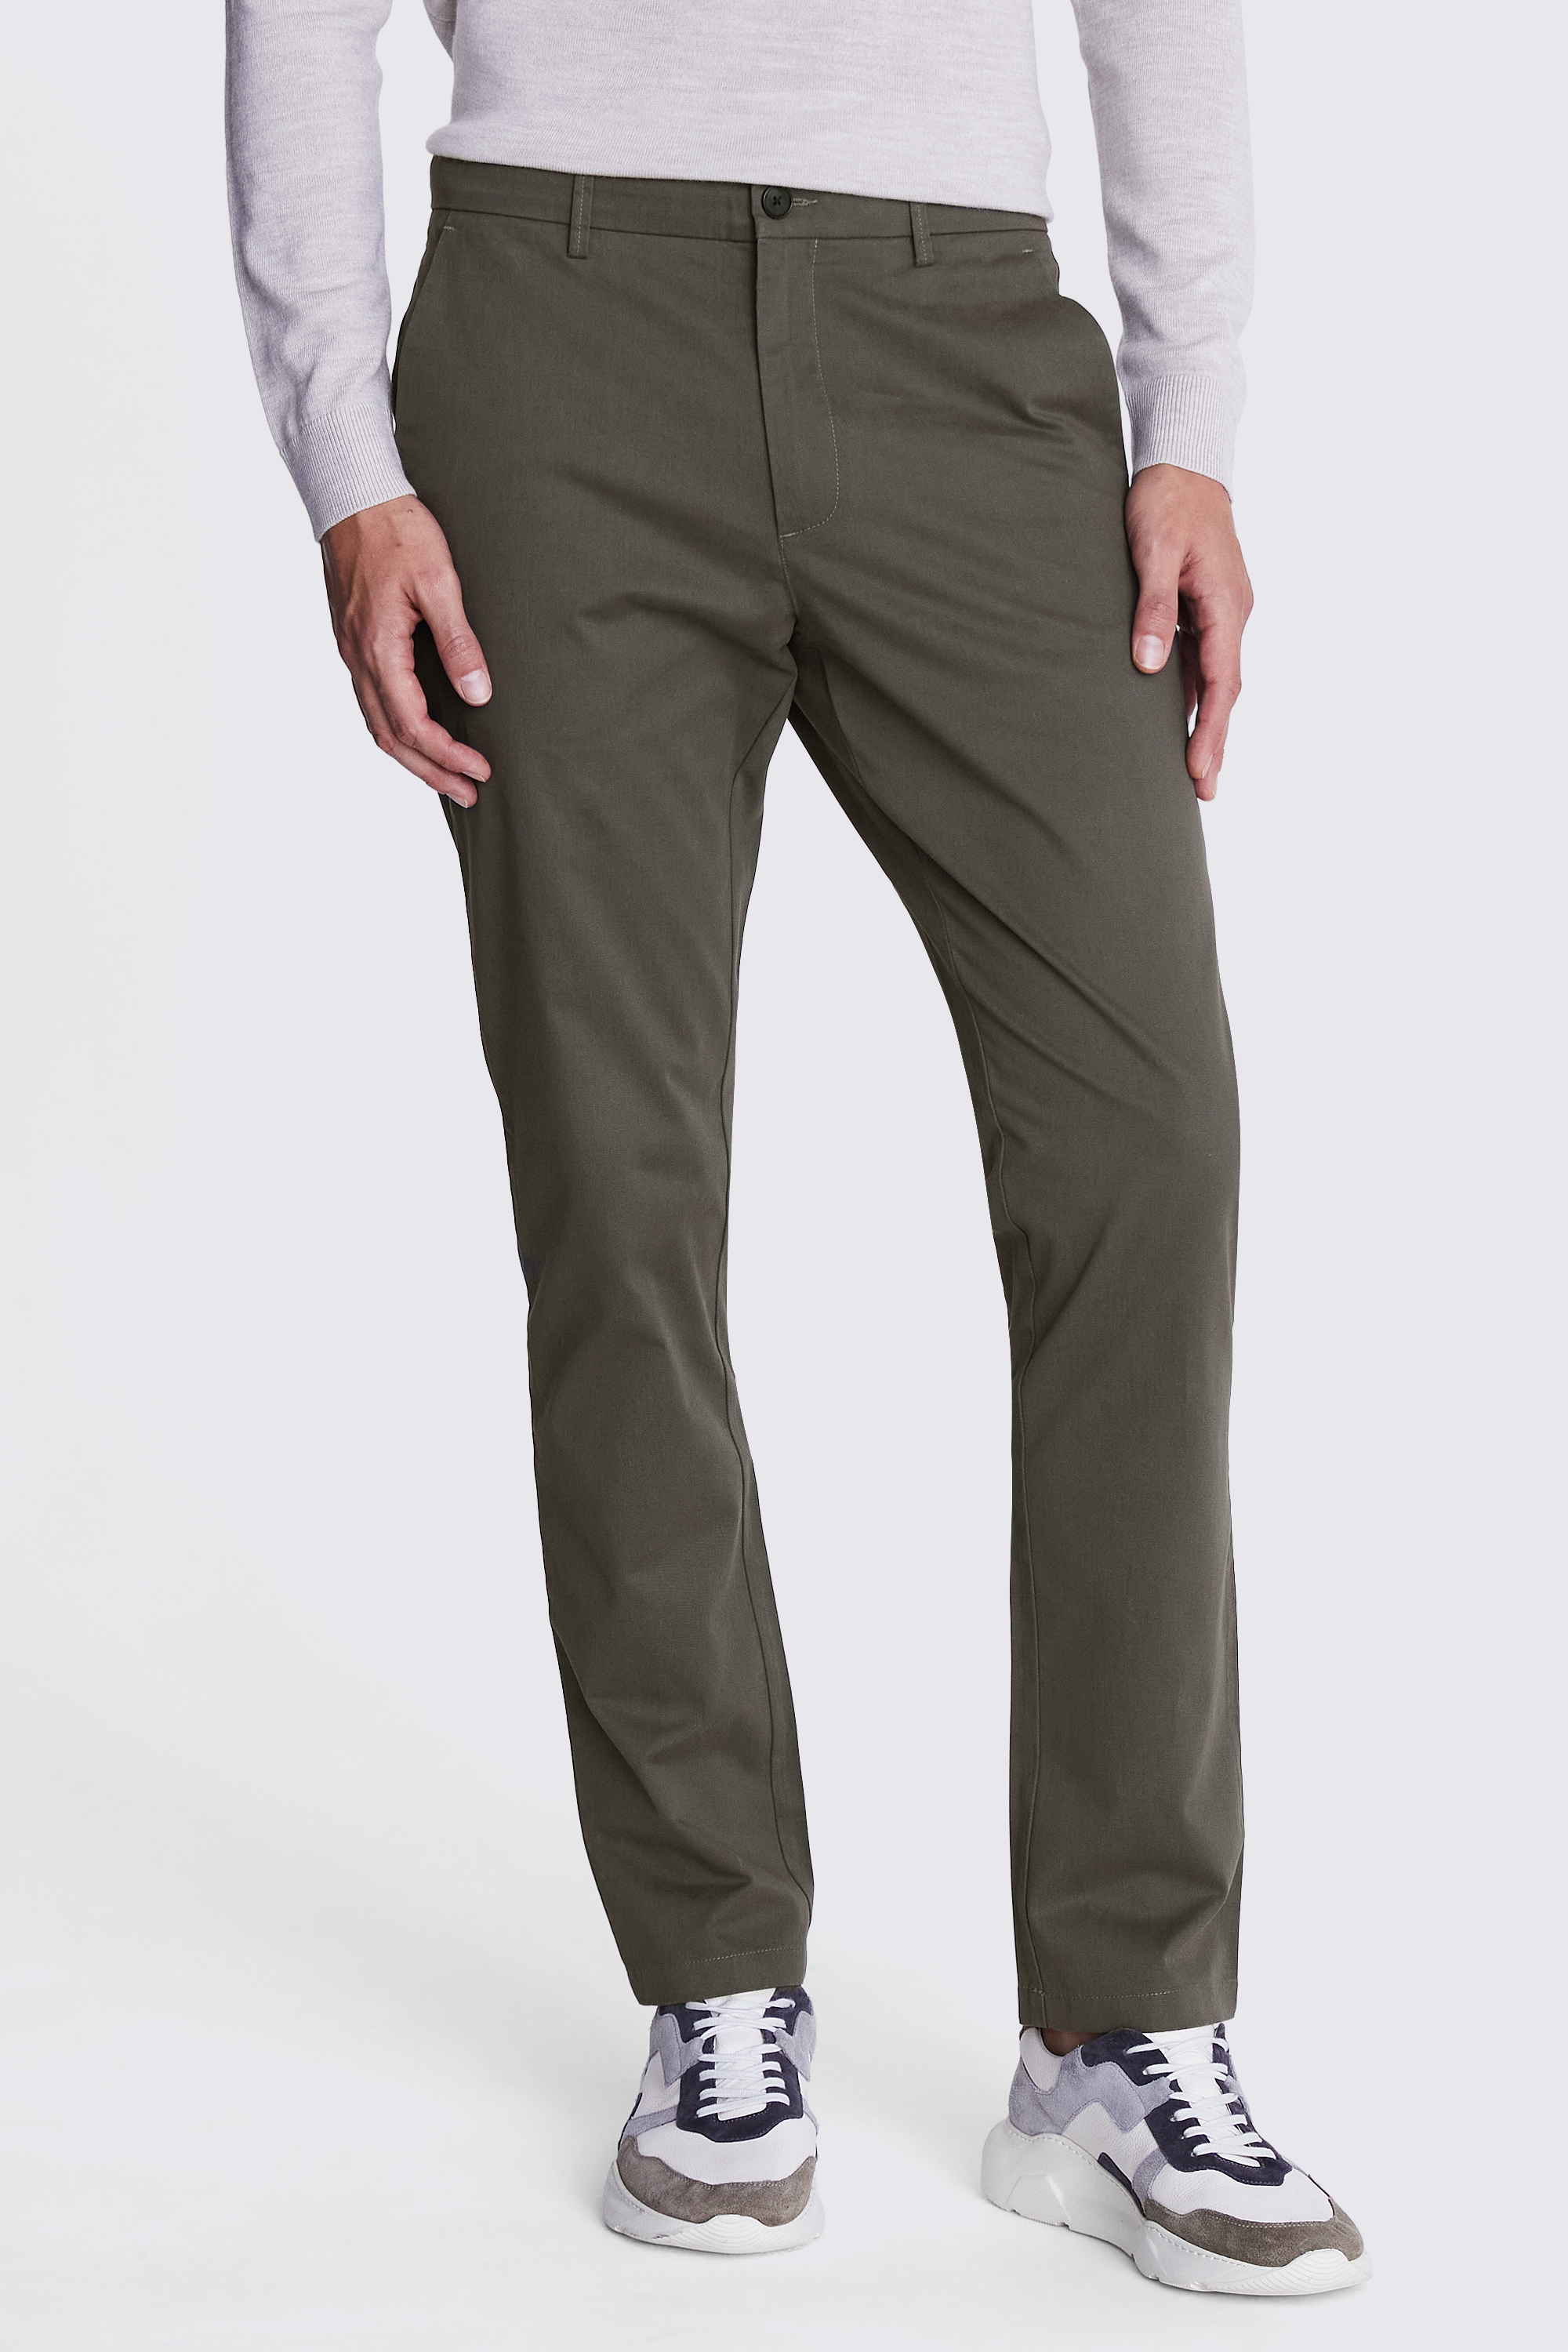 Tailored Fit Khaki Stretch Chinos | Buy Online at Moss